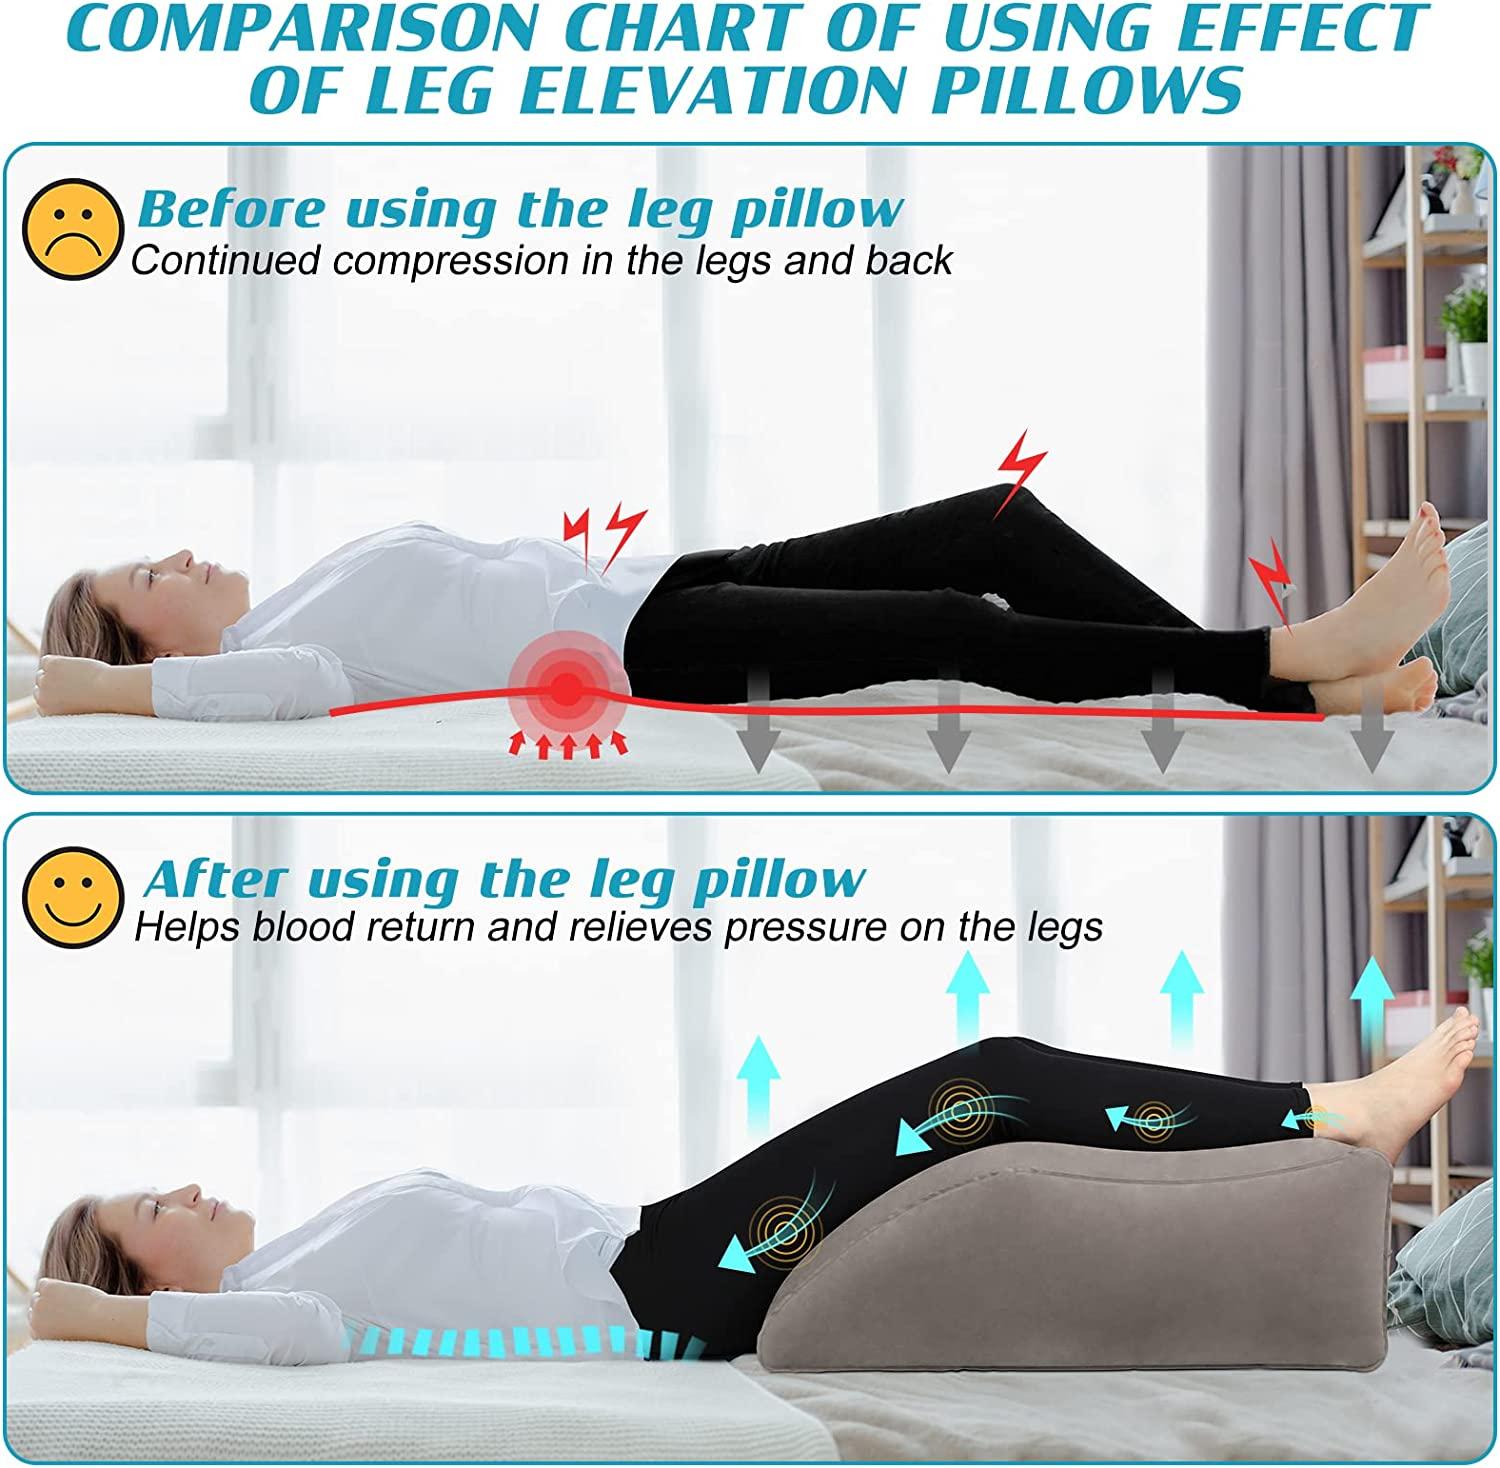 Back Pain Pillow, Wedge Pillow, Back Cushion, Pillow for Back